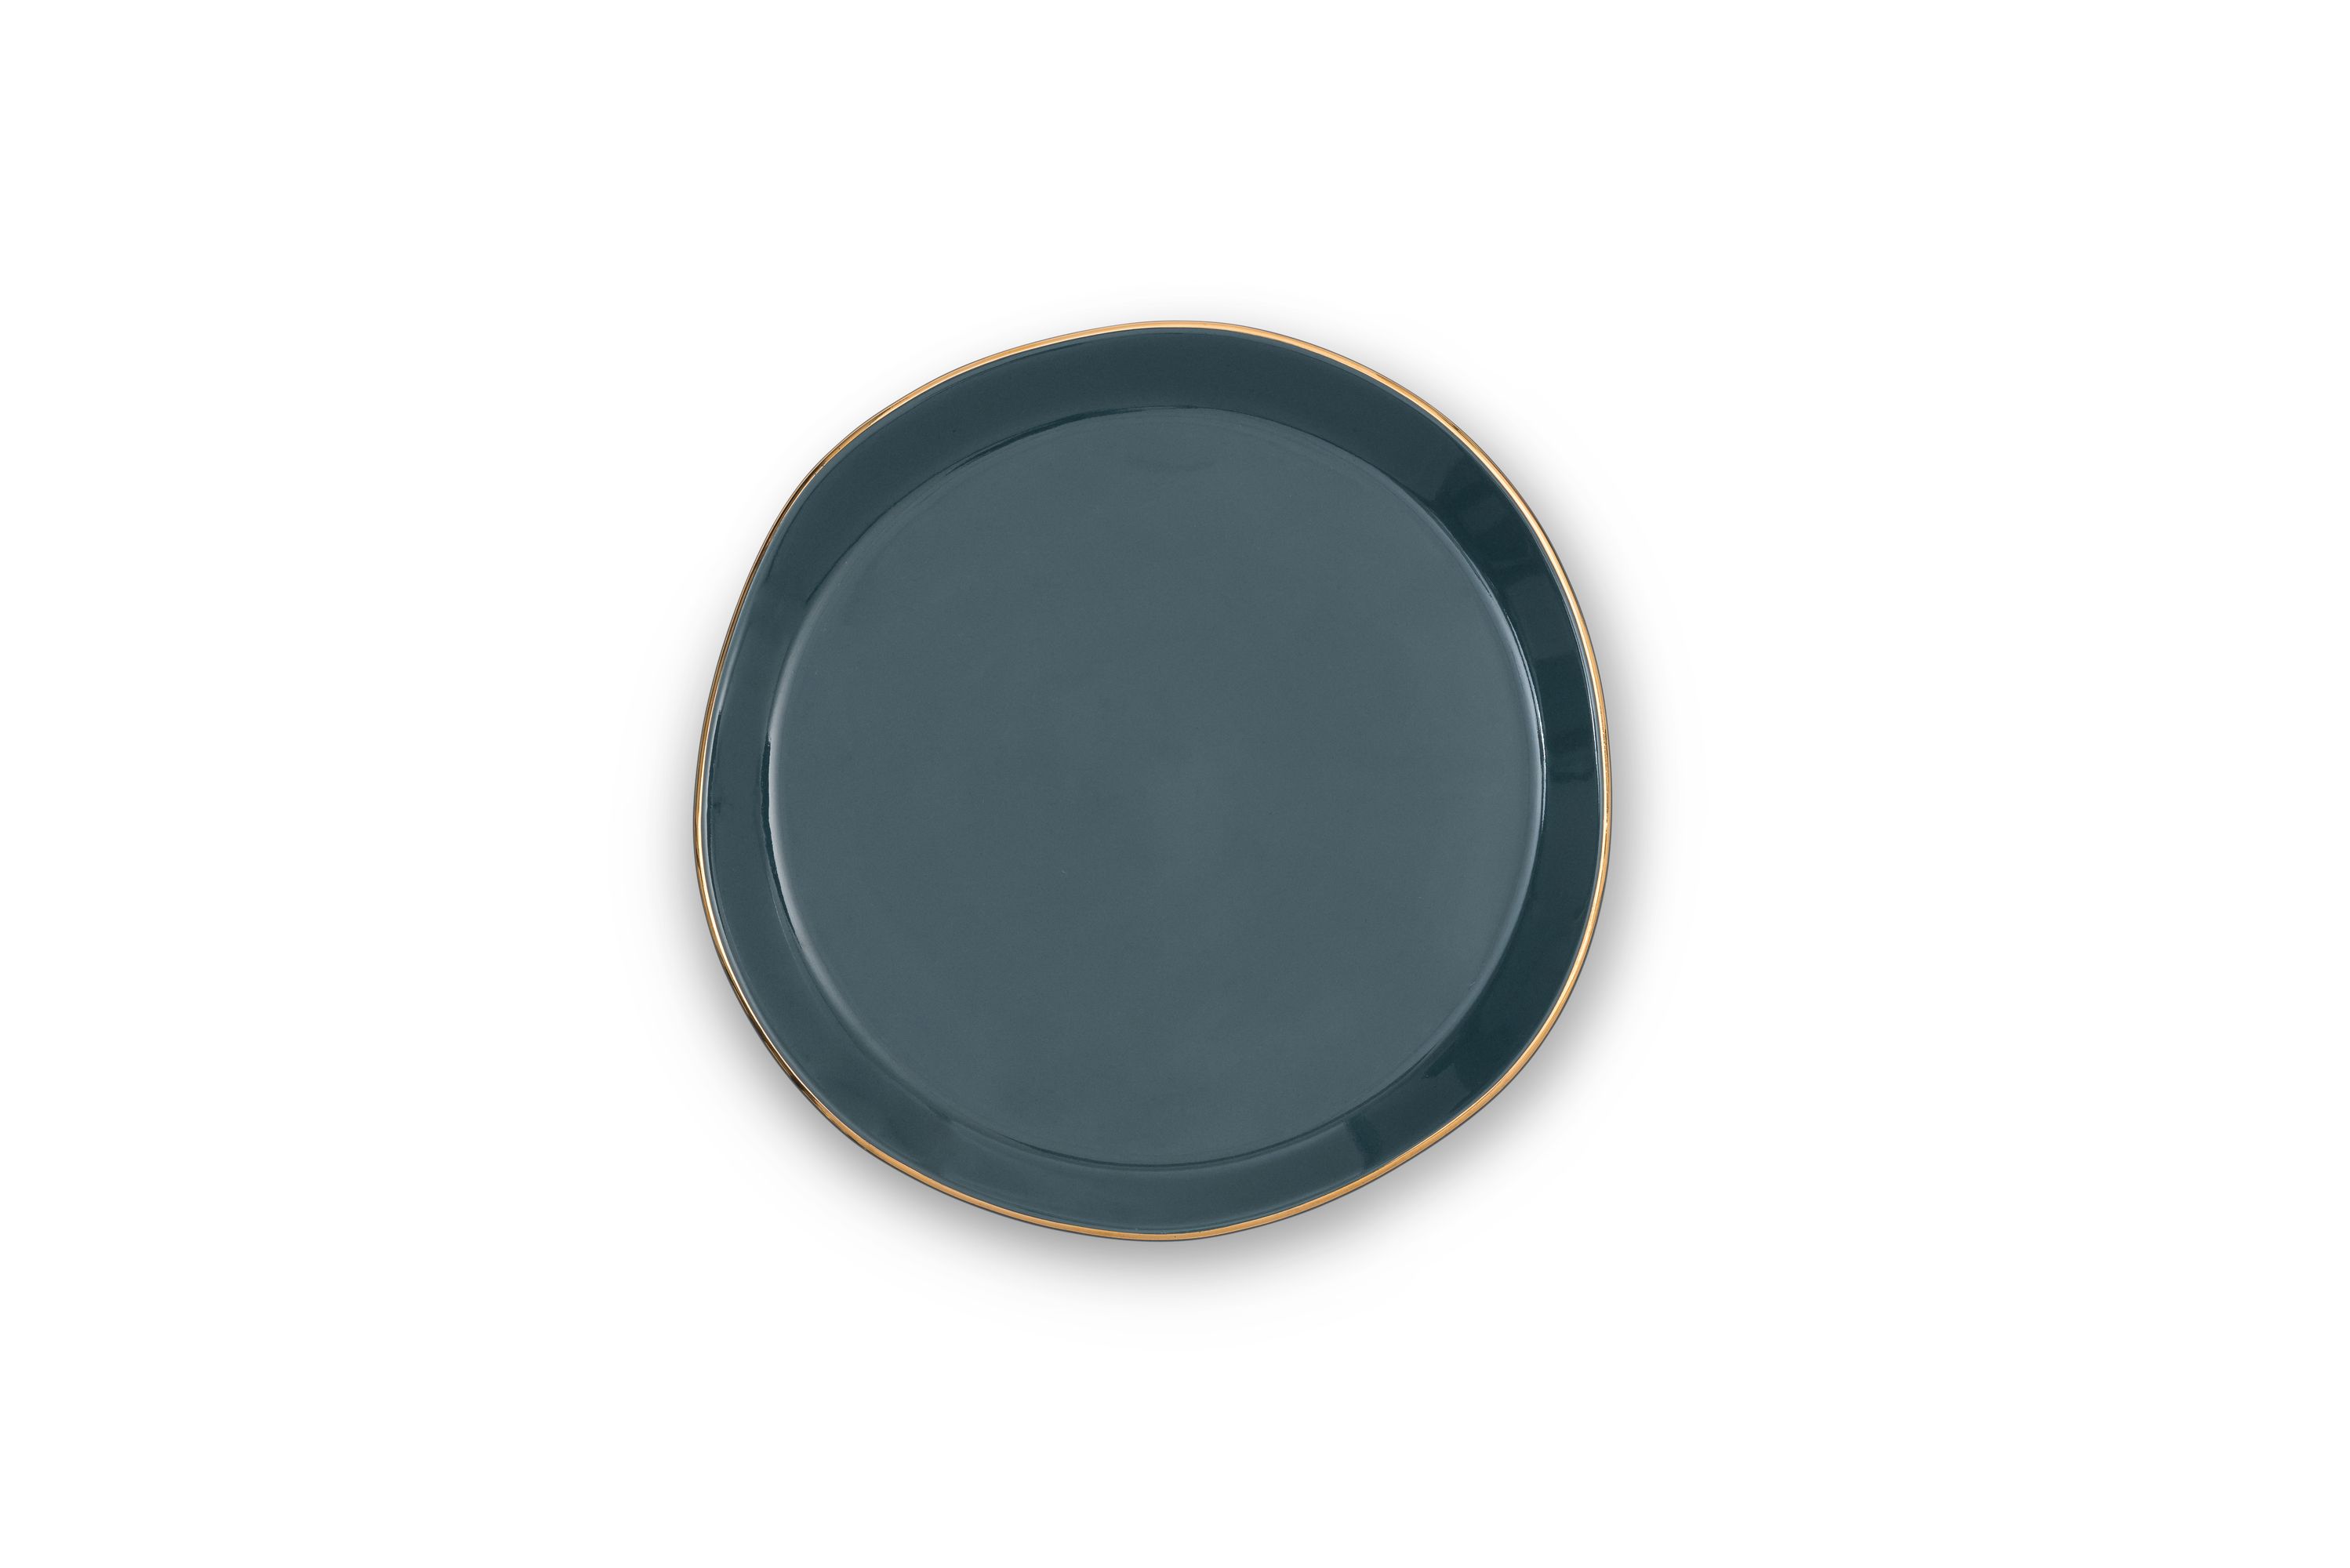 Unc Good Morning Plate Blue Green Gift